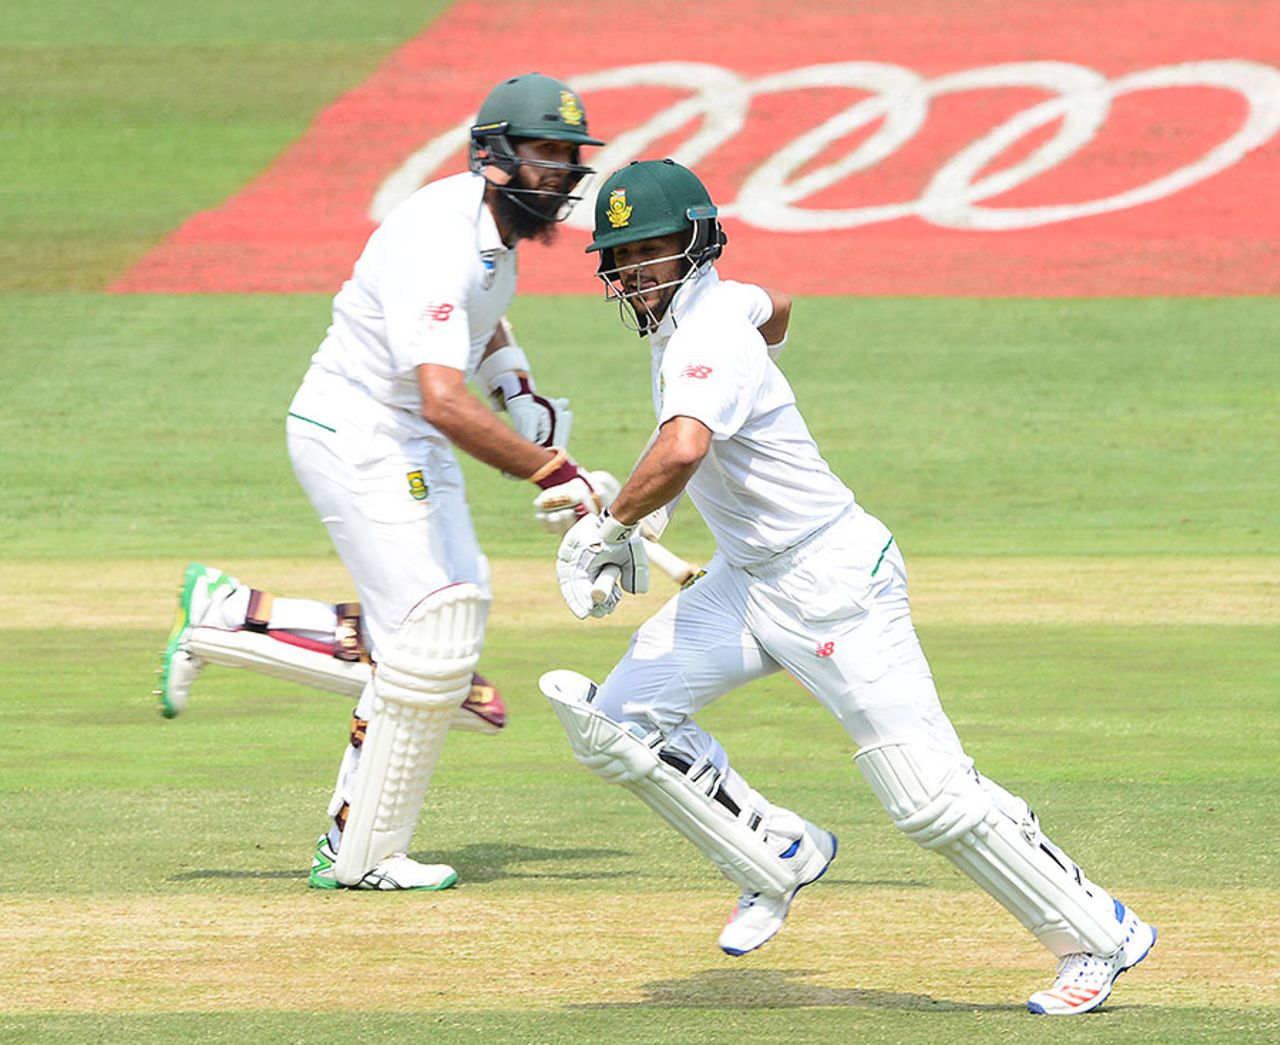 JP Duminy and Hashim Amla run between the wickets during their big stand, South Africa v Sri Lanka, 3rd Test, Johannesburg, 1st day, January 12, 2017